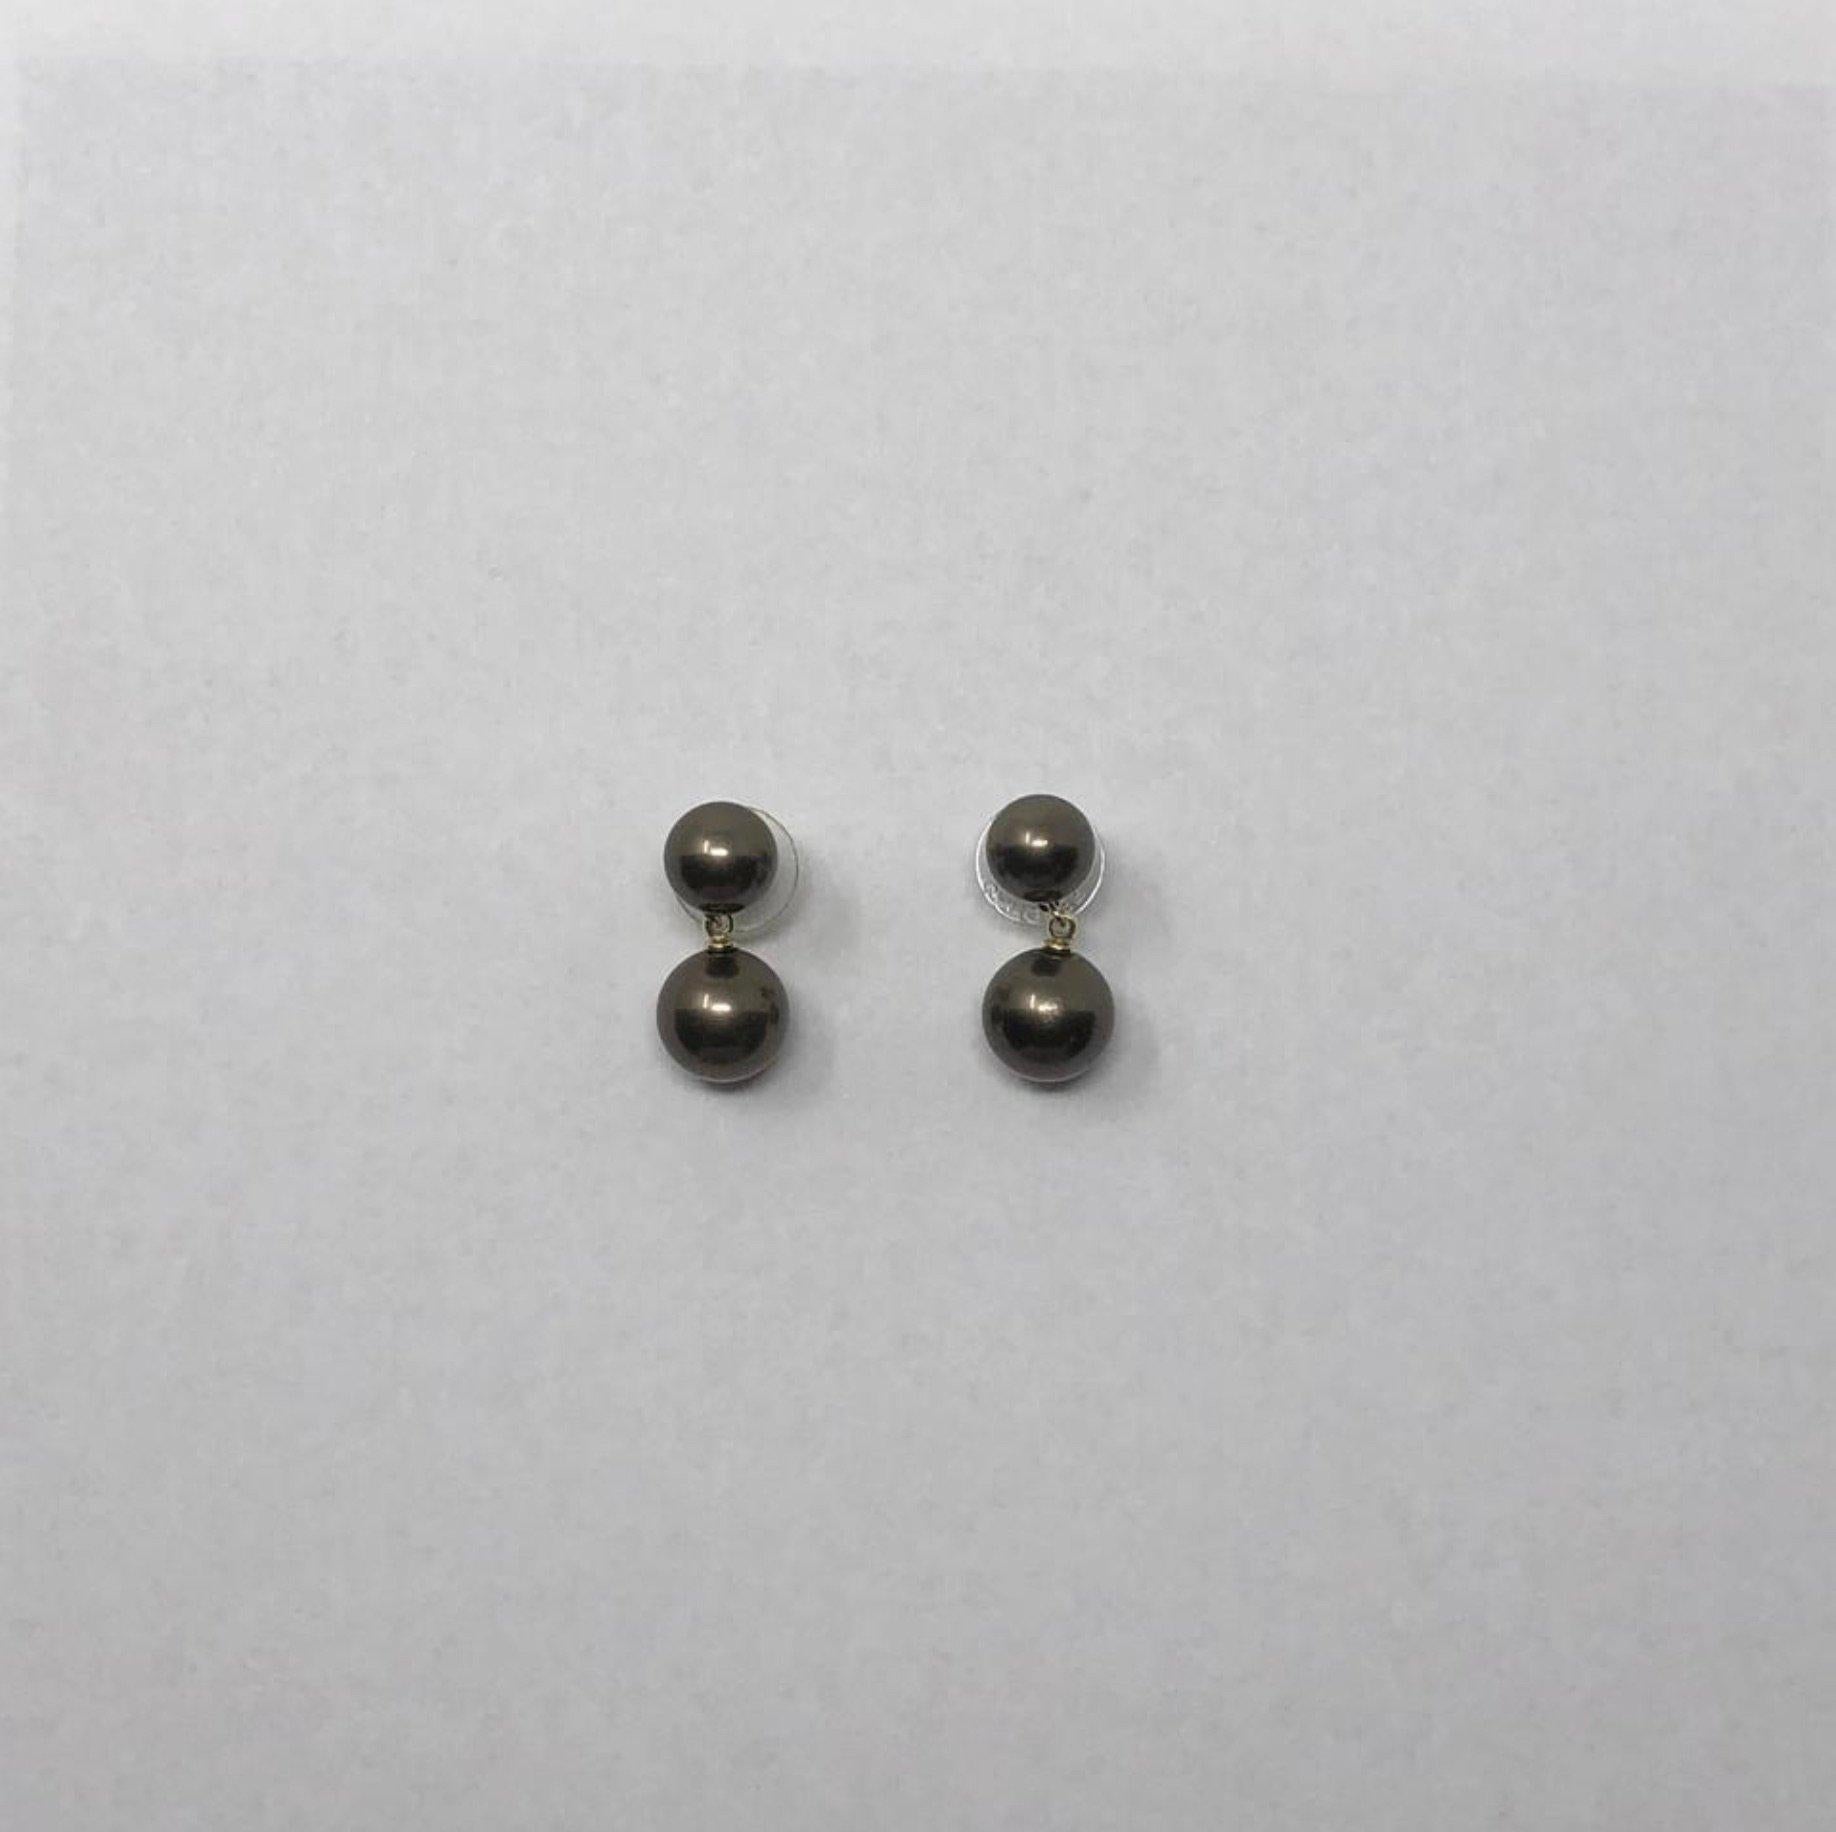 MODEL - Carolee Round Black Double Faux Pearl Drop Earrings

CONDITION - Exceptional! No signs of wear.

SKU - 2343-FL

ORIGINAL RETAIL PRICE - 150 + tax

MATERIAL - Faux Pearl

WEIGHT - NA

DIMENSIONS - L7mm x H7mm x D7mm (.75 inch drop)

COMES